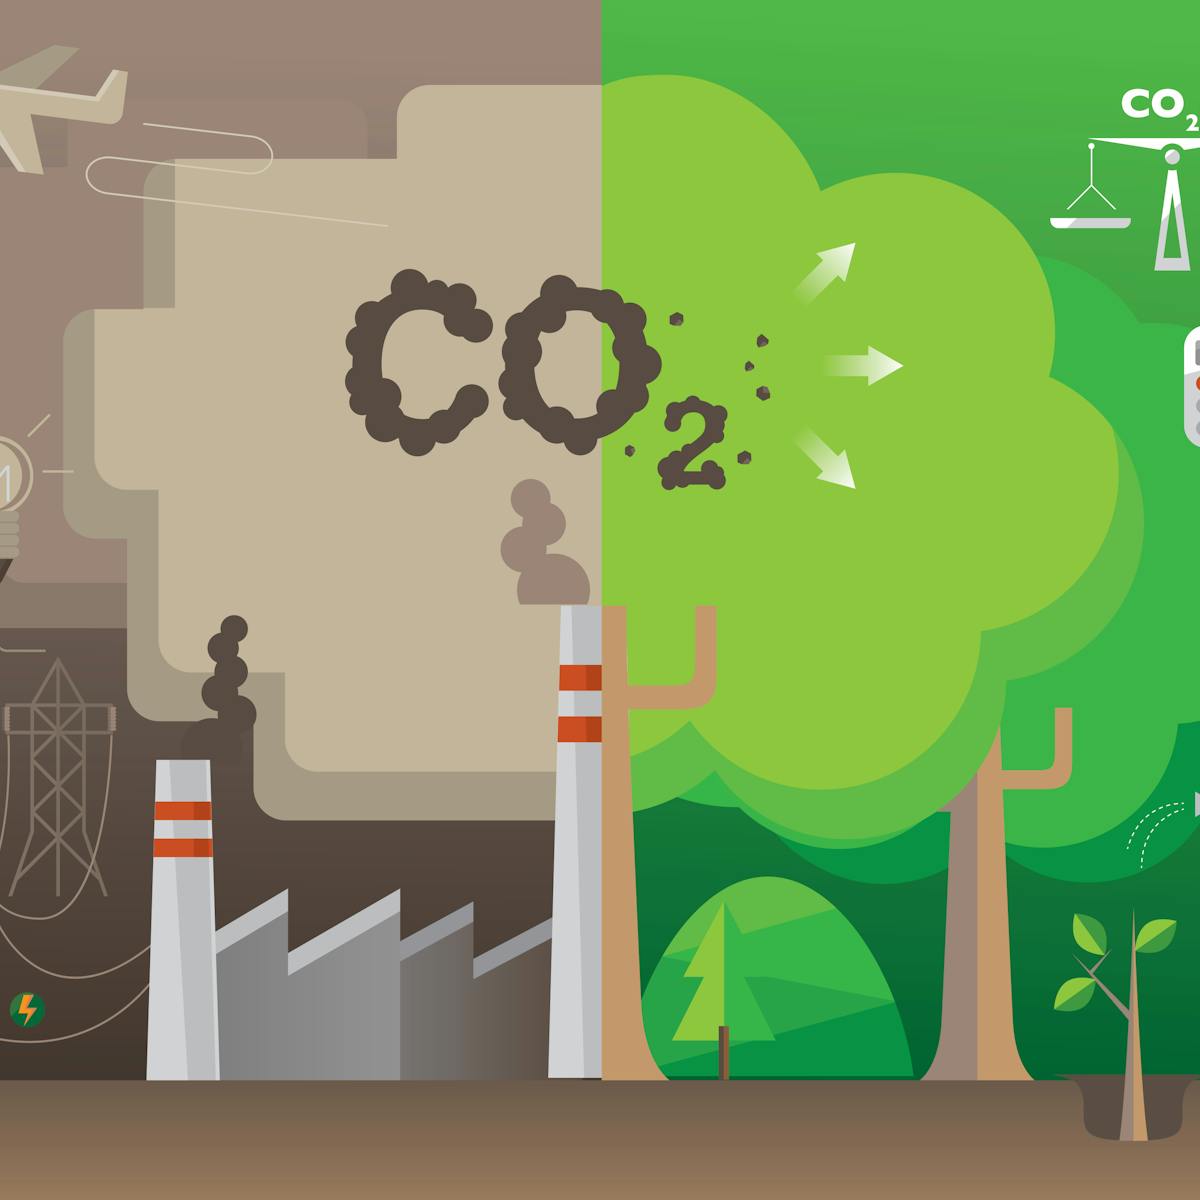 net-zero, carbon-neutral, carbon-negative ... confused by all the carbon jargon? then read this